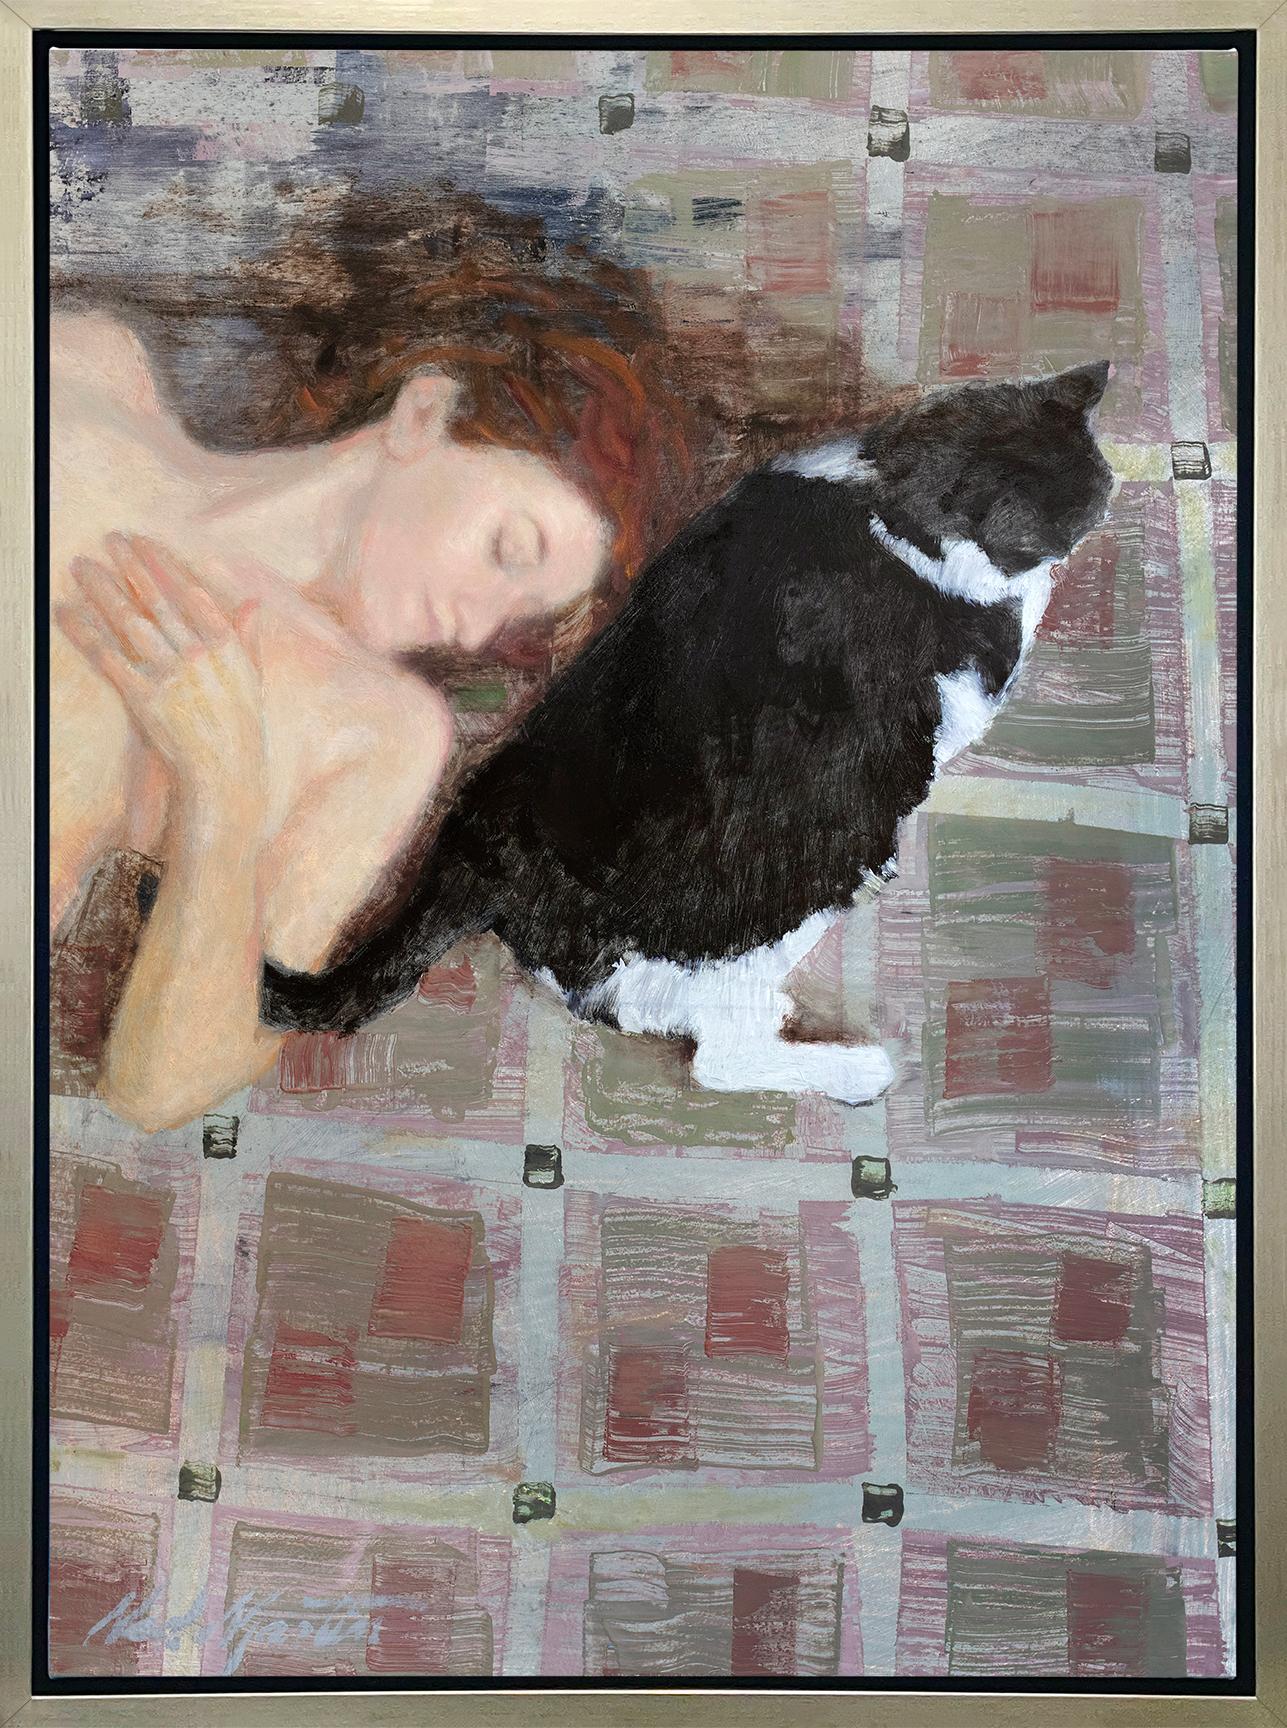 Ned Martin Figurative Print - "Lazy Day, " Framed Limited Edition Giclee Print, 24" x 18"